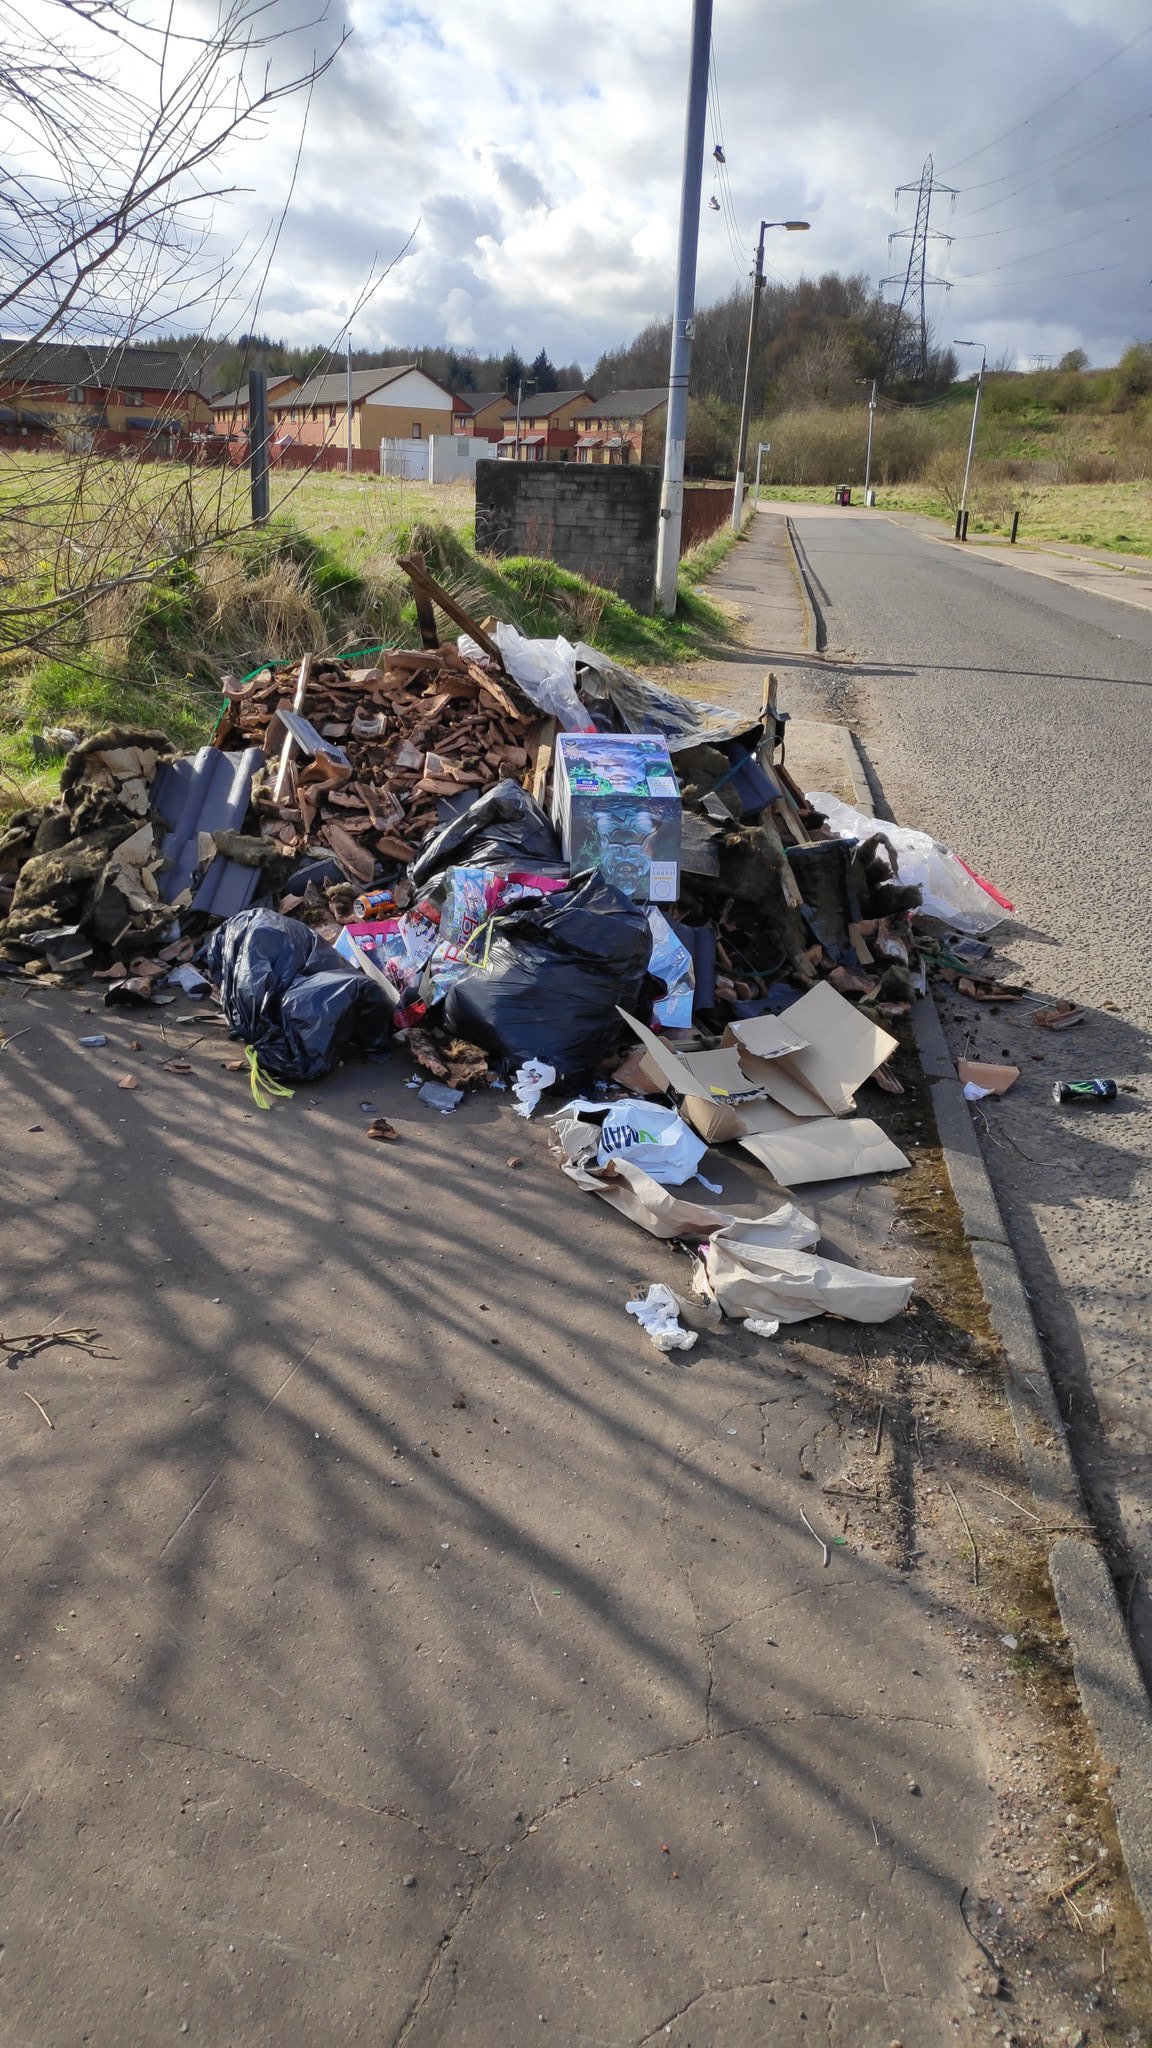 Fly tipping and rubbish issues in Drumchapel have provoked a clean up drive